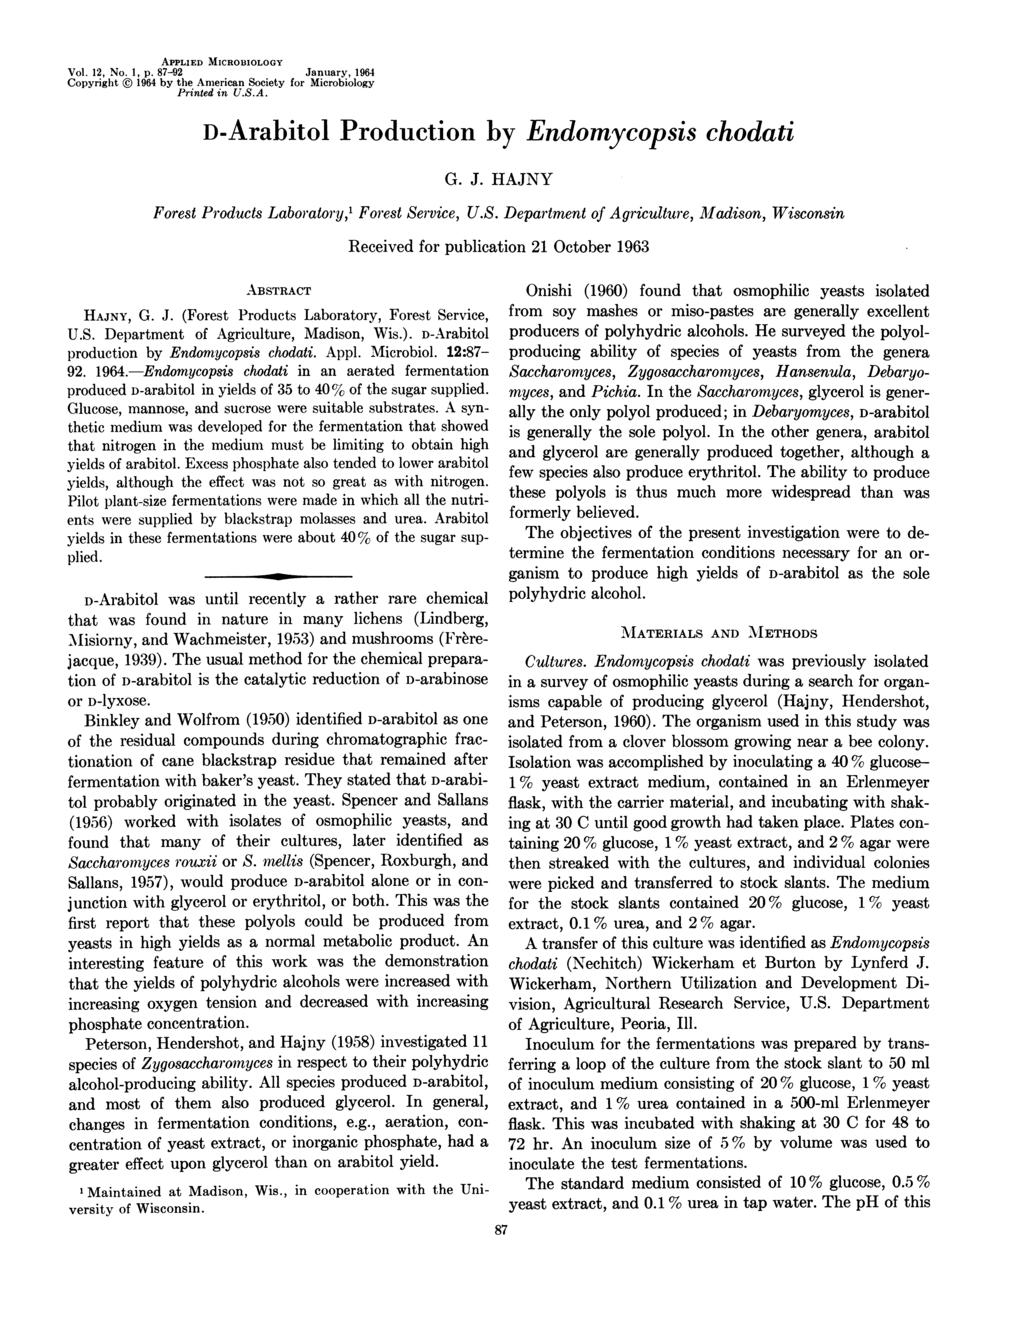 APPLIED MICROBIOLOGY Vol. 12, No. 1, p. 87-92 January, 1964 Copyright (D 1964 by the American Society for Microbiology Printed in U.S.A. D-Arabitol Production by Endomycopsis chodati Forest Products Laboratory,1 Forest Service, G.